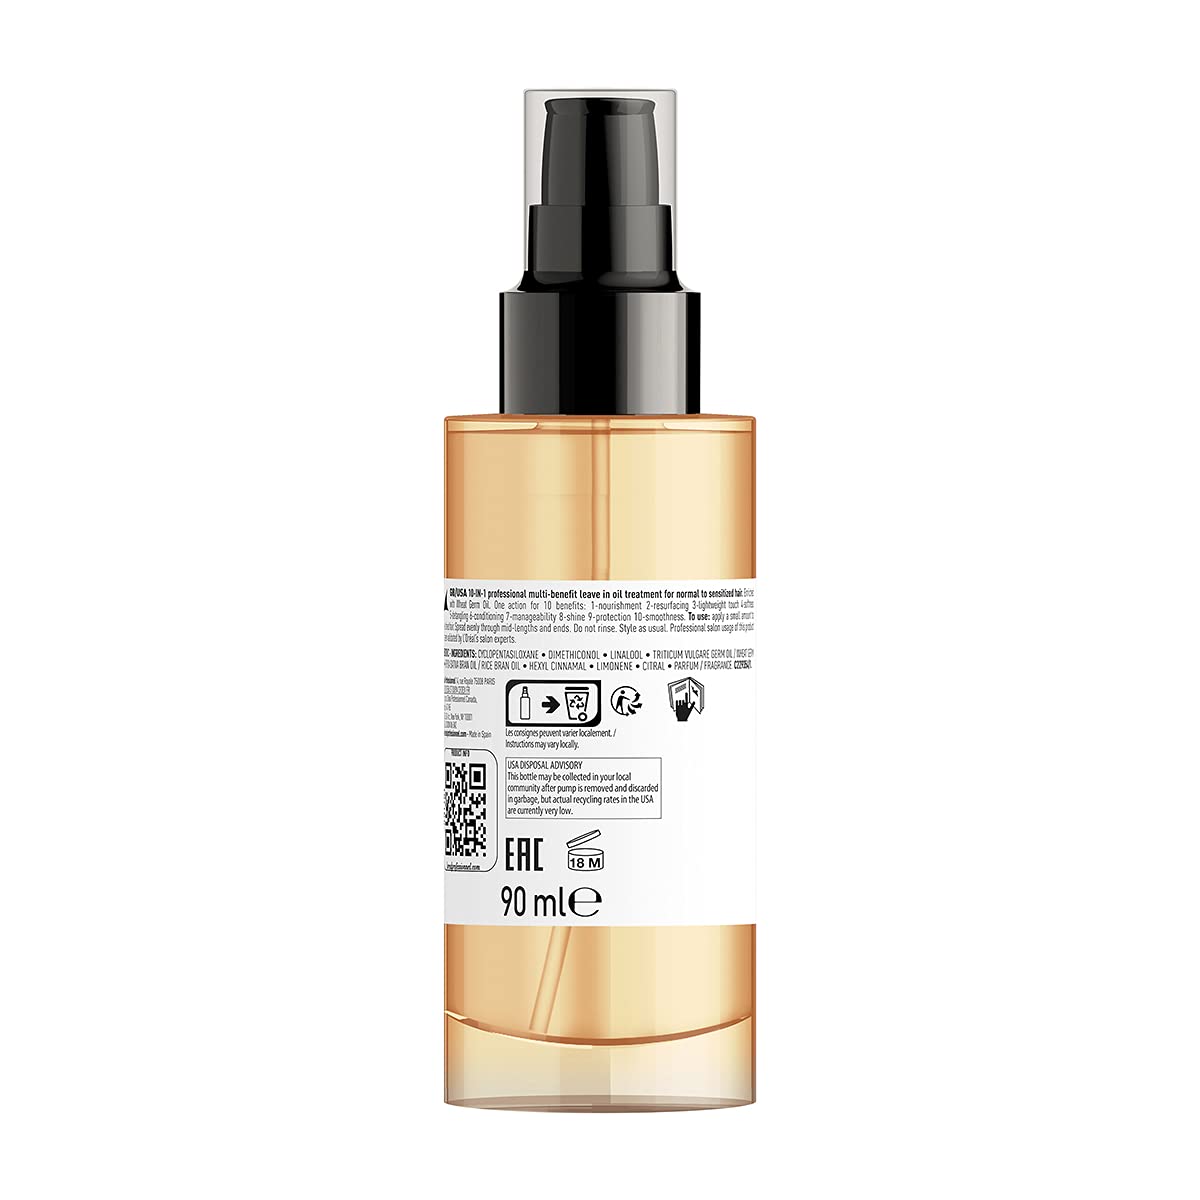 L’Oréal Professionnel Absolut Repair Oil 10-in-1 Multi-benefit Leave-In Hair Serum with Wheat Germ Oil for Dry & Damaged Hair, Serie Expert, 90ml